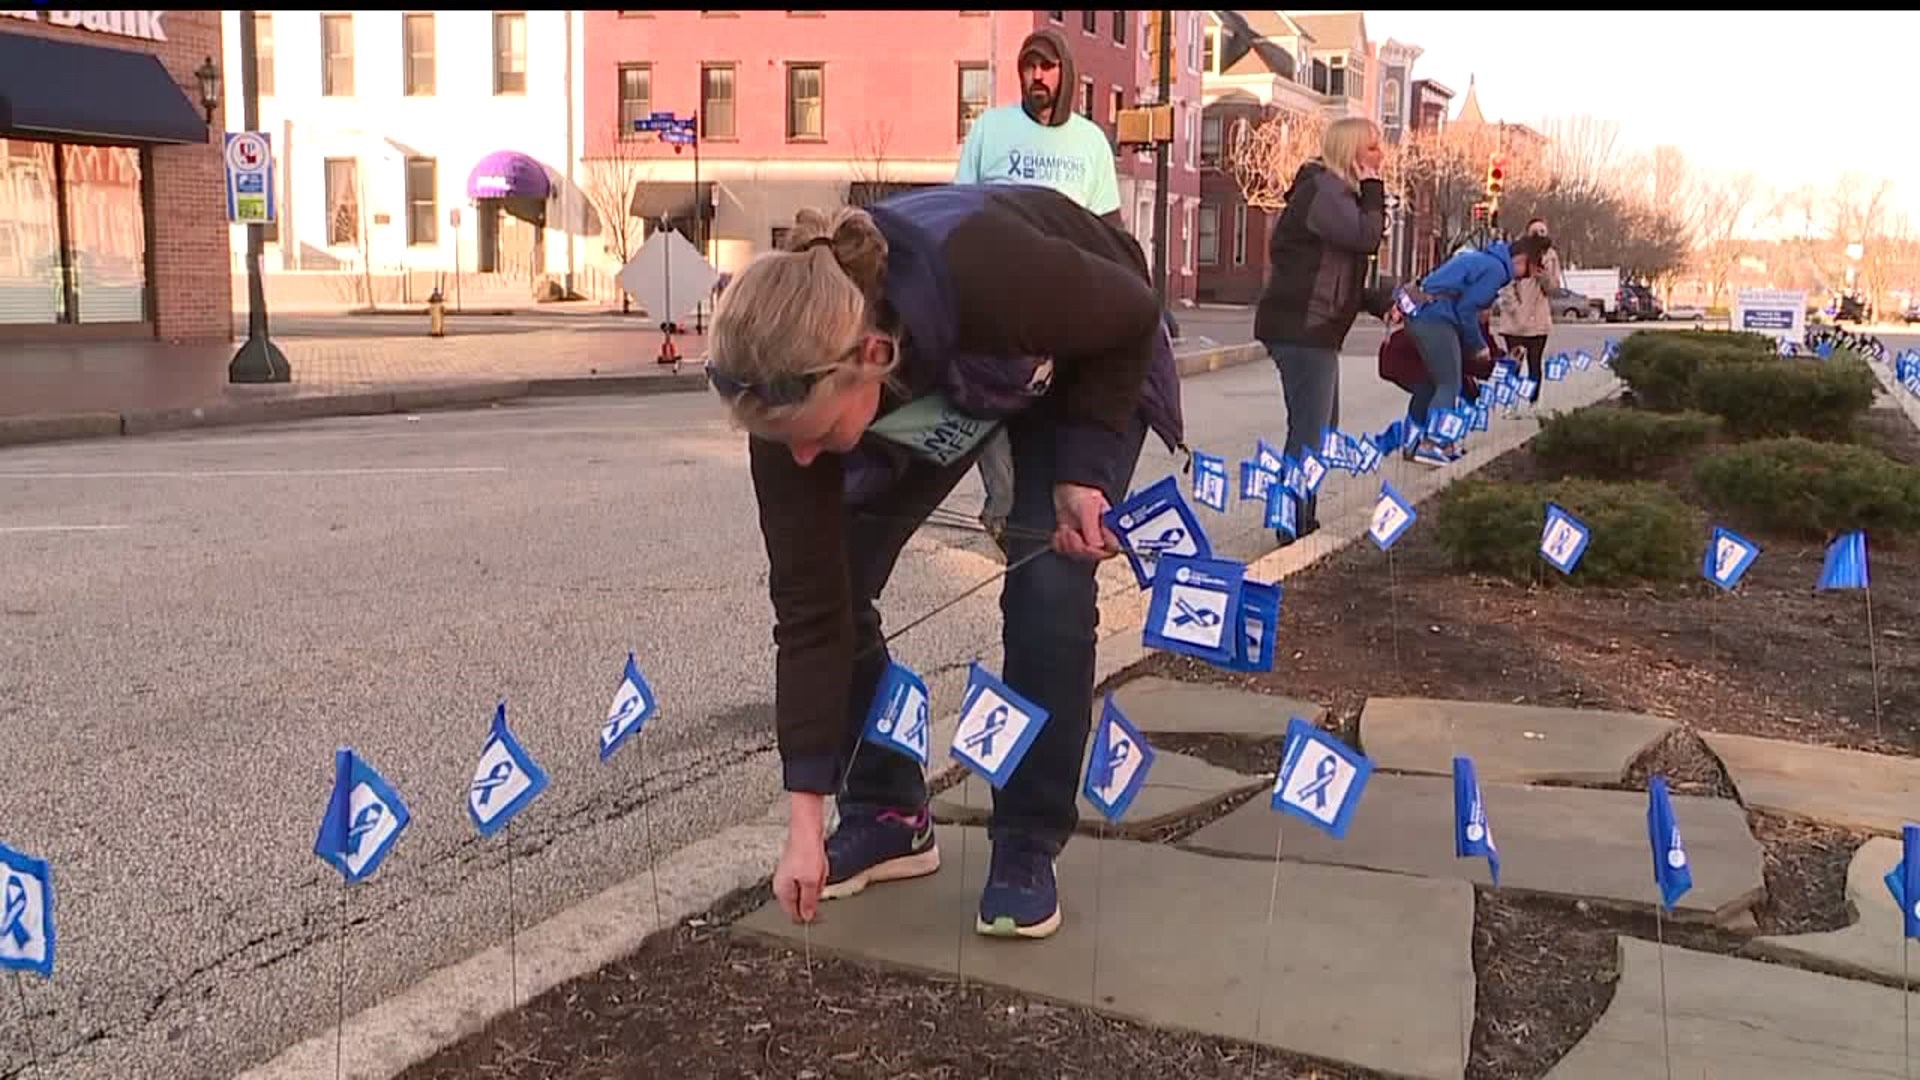 Blue lights and flags honor victims of child abuse in Pennsylvania